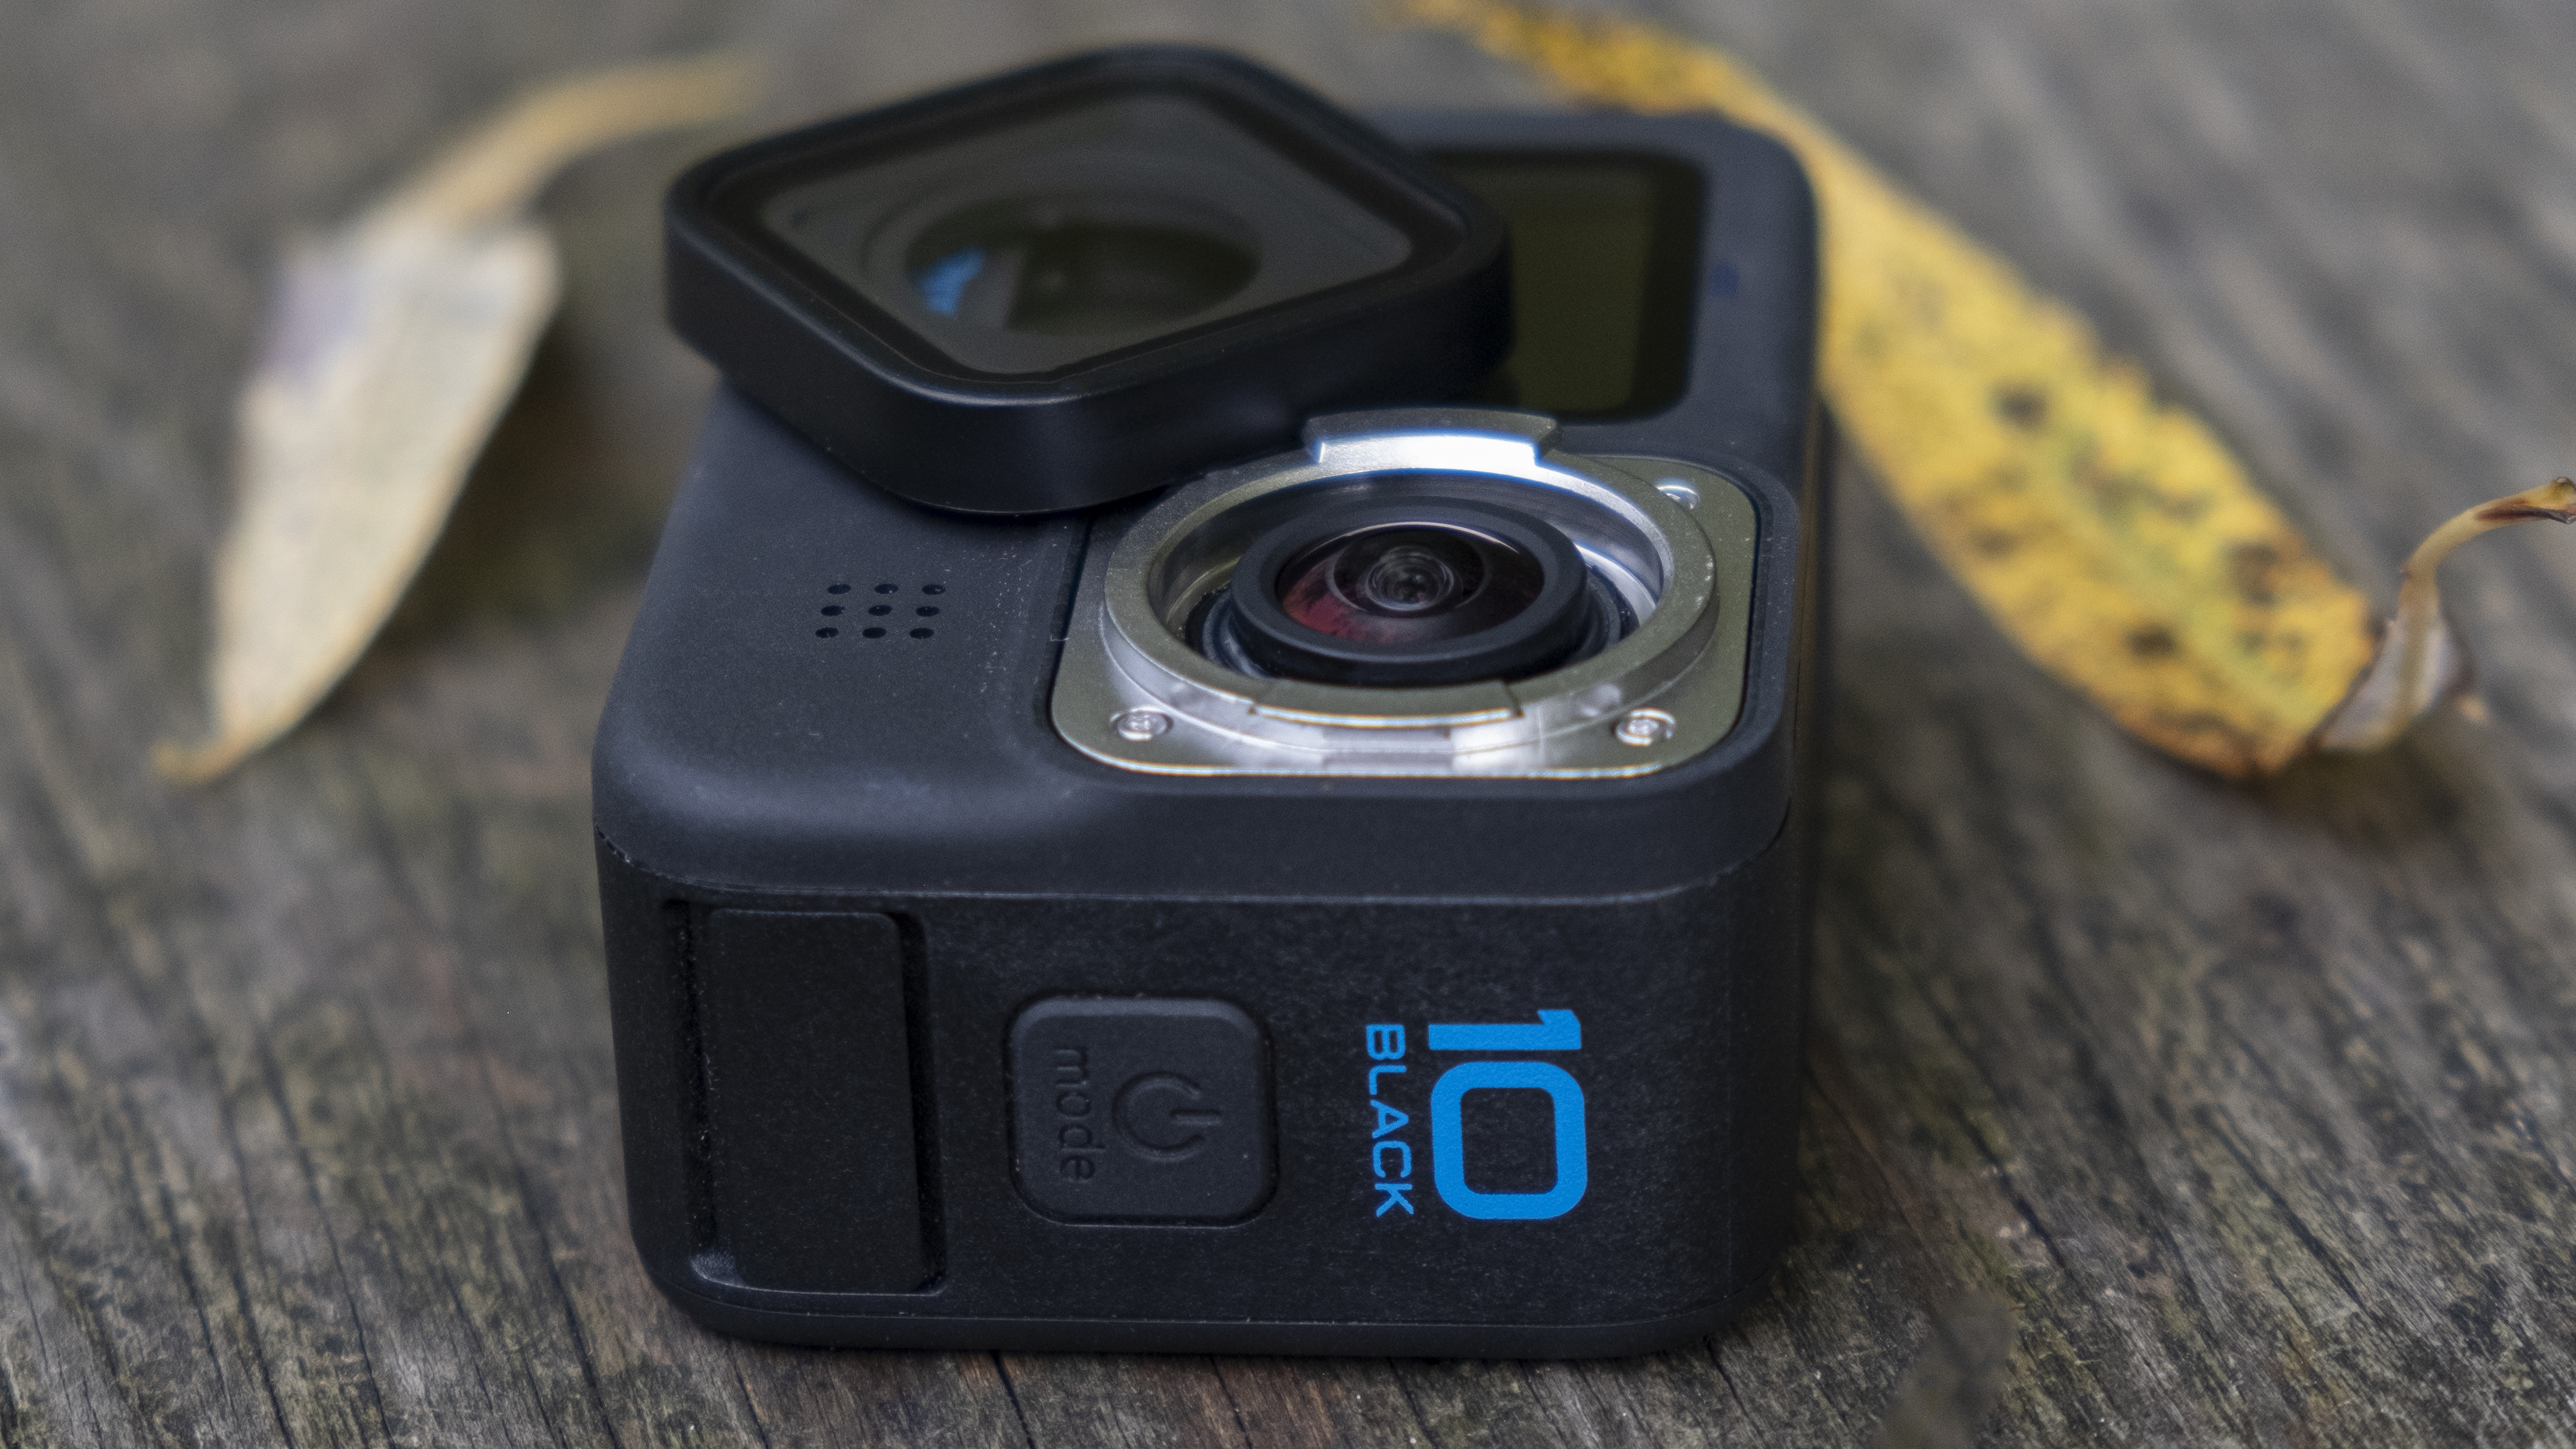 The GoPro Hero 10 Black action camera sitting on a wooden bench